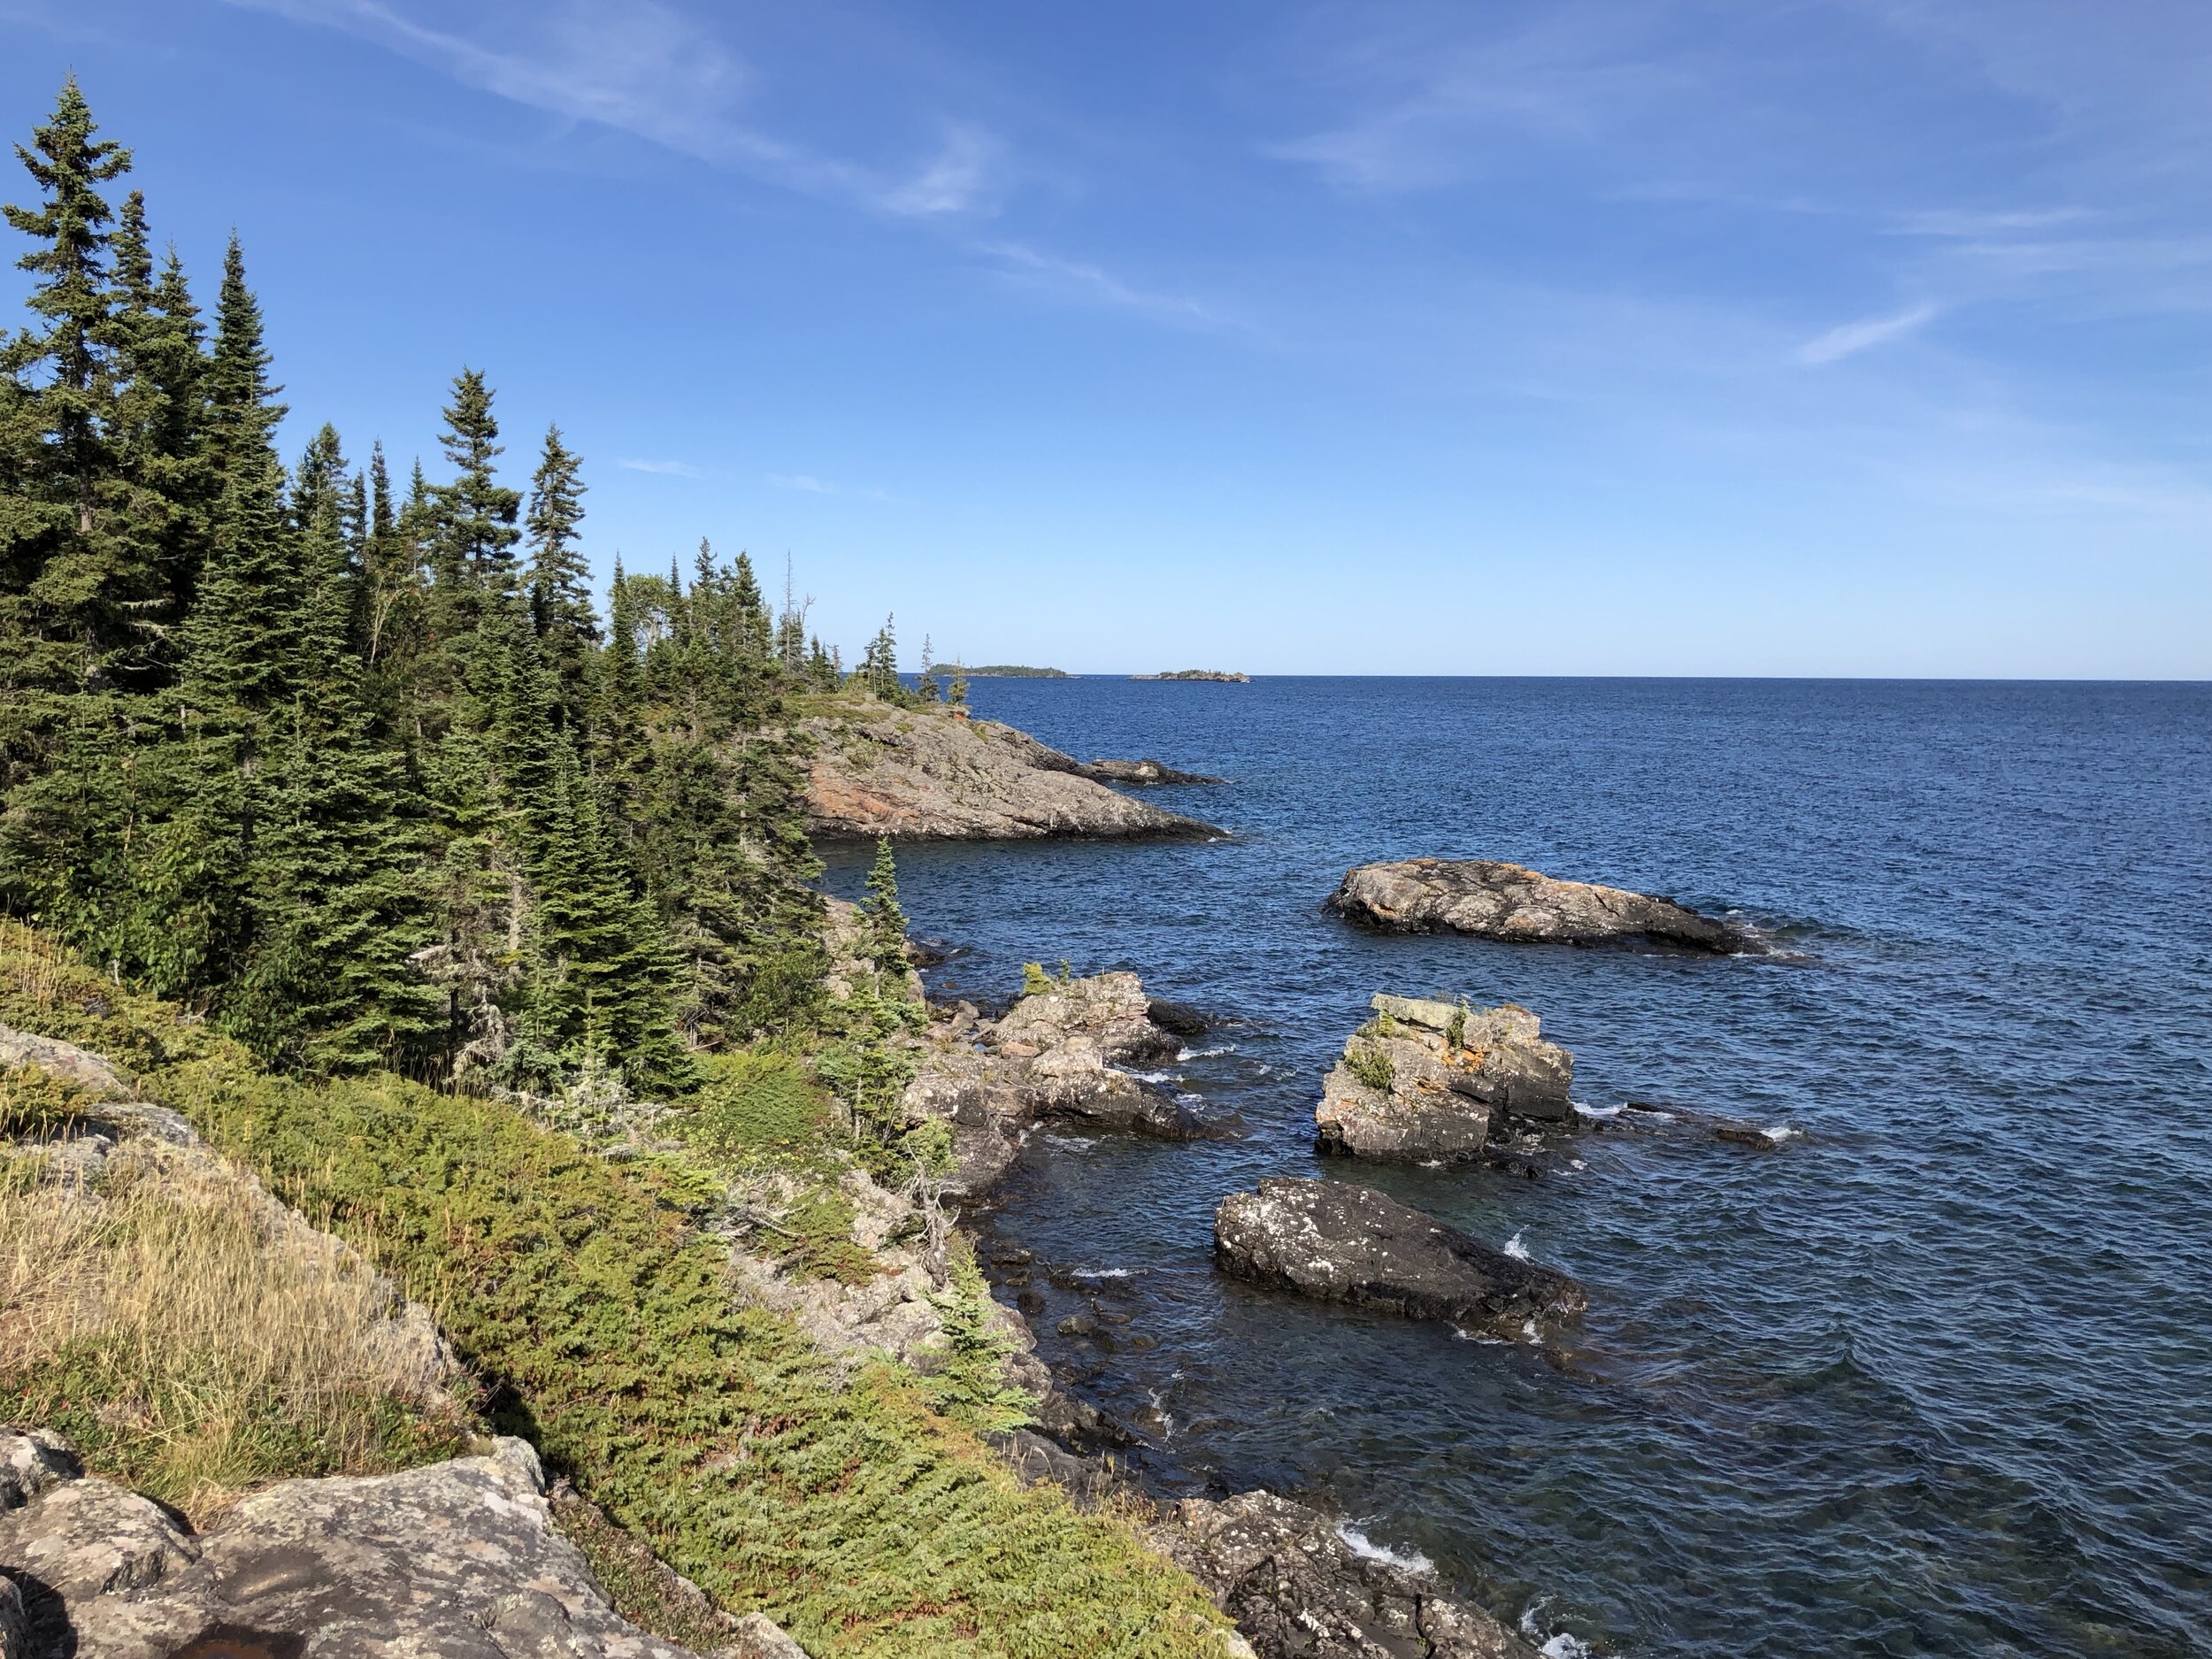 Isle Royale National Park is isolated by virtue of its location in Lake Superior, the largest freshwater lake (by surface area) in the world.